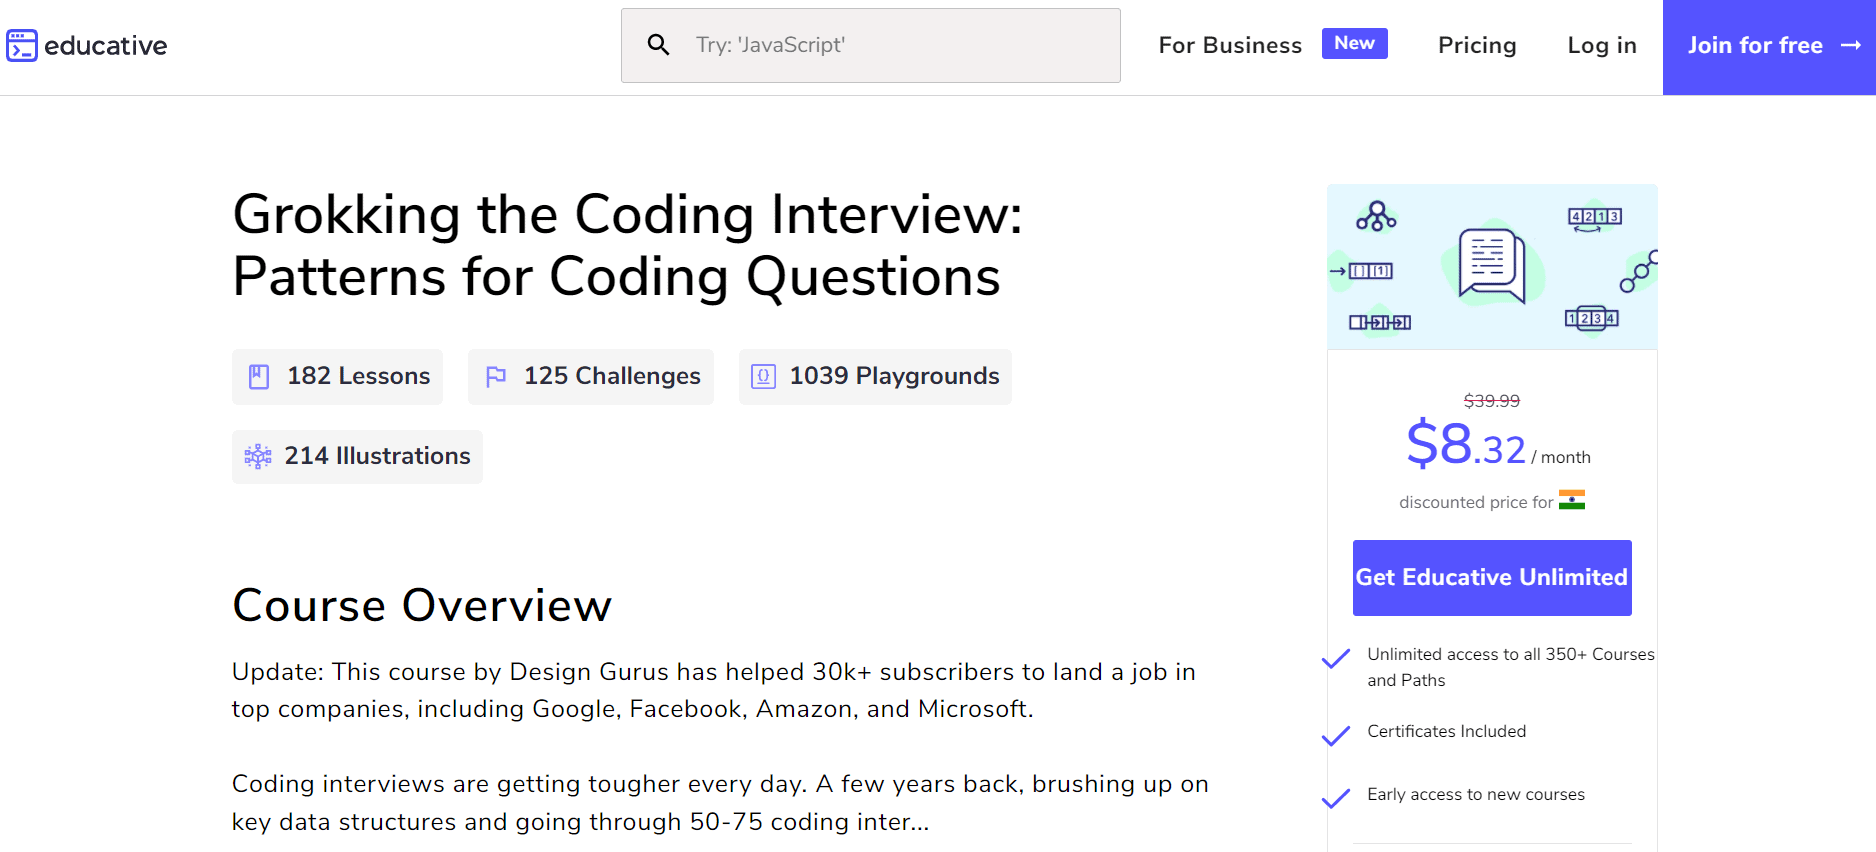 Grokking the Coding Interview